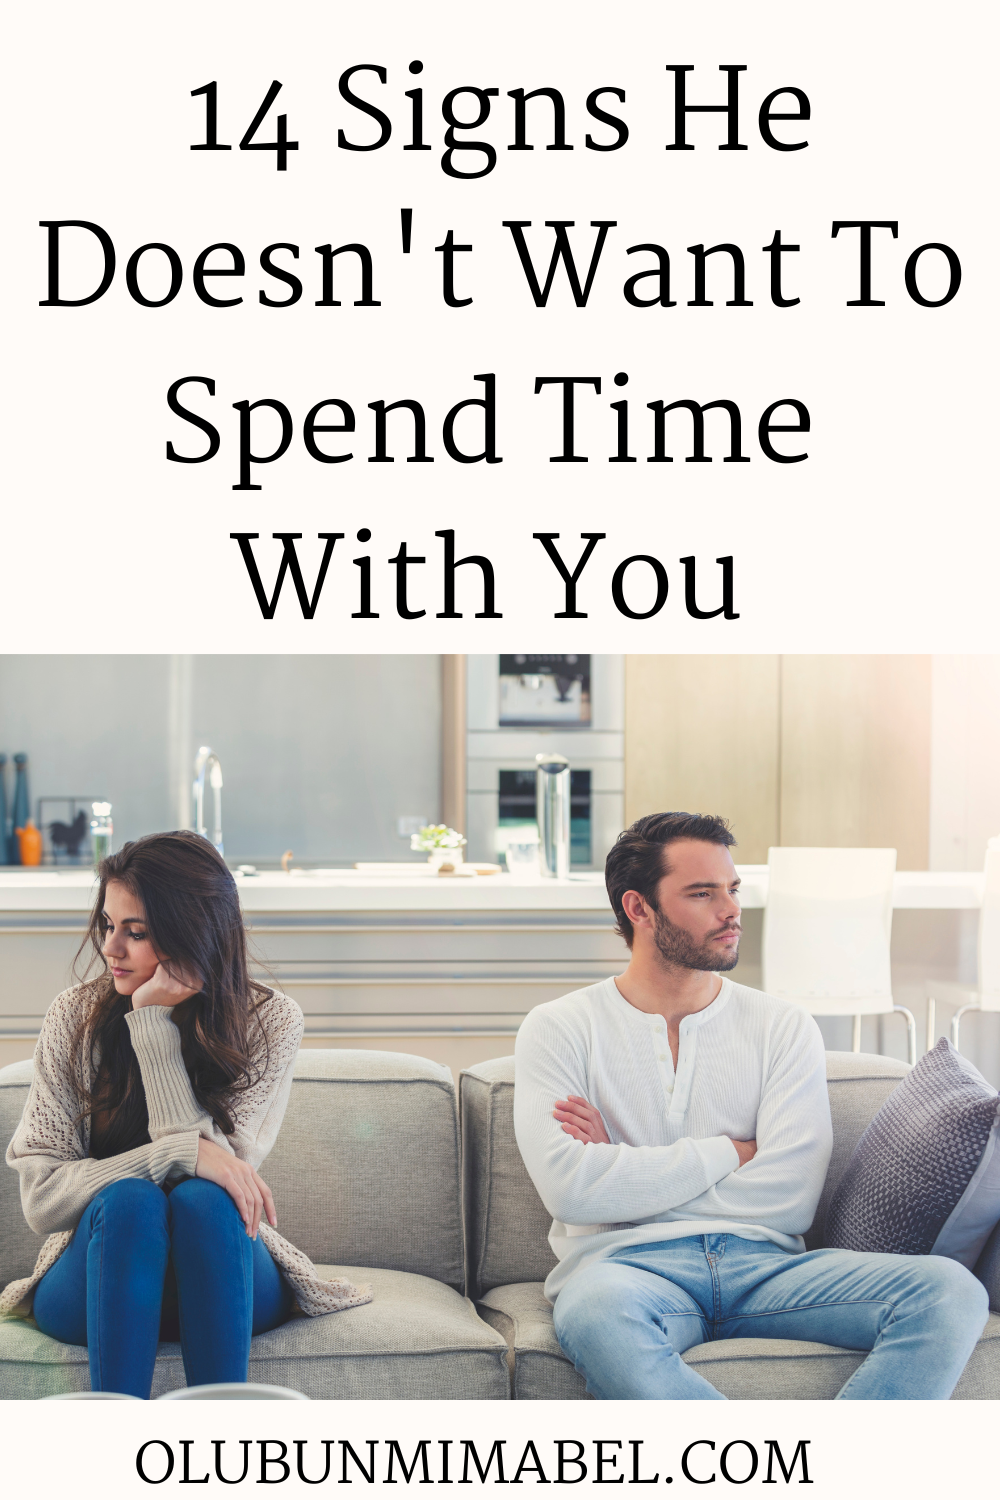 Signs He Doesn't Want To Spend Time With You